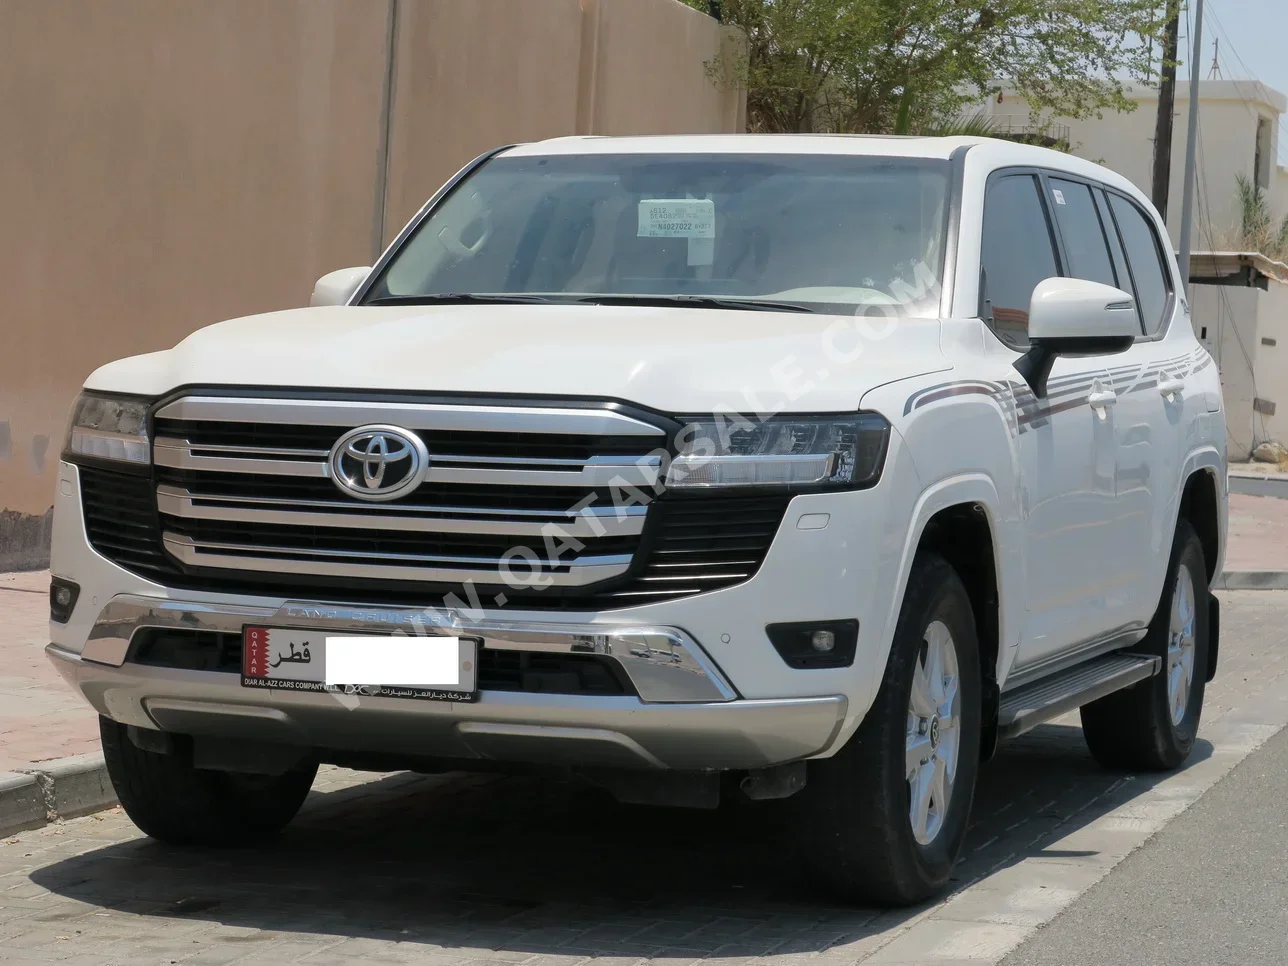 Toyota  Land Cruiser  GXR Twin Turbo  2022  Automatic  23,000 Km  6 Cylinder  Four Wheel Drive (4WD)  SUV  White